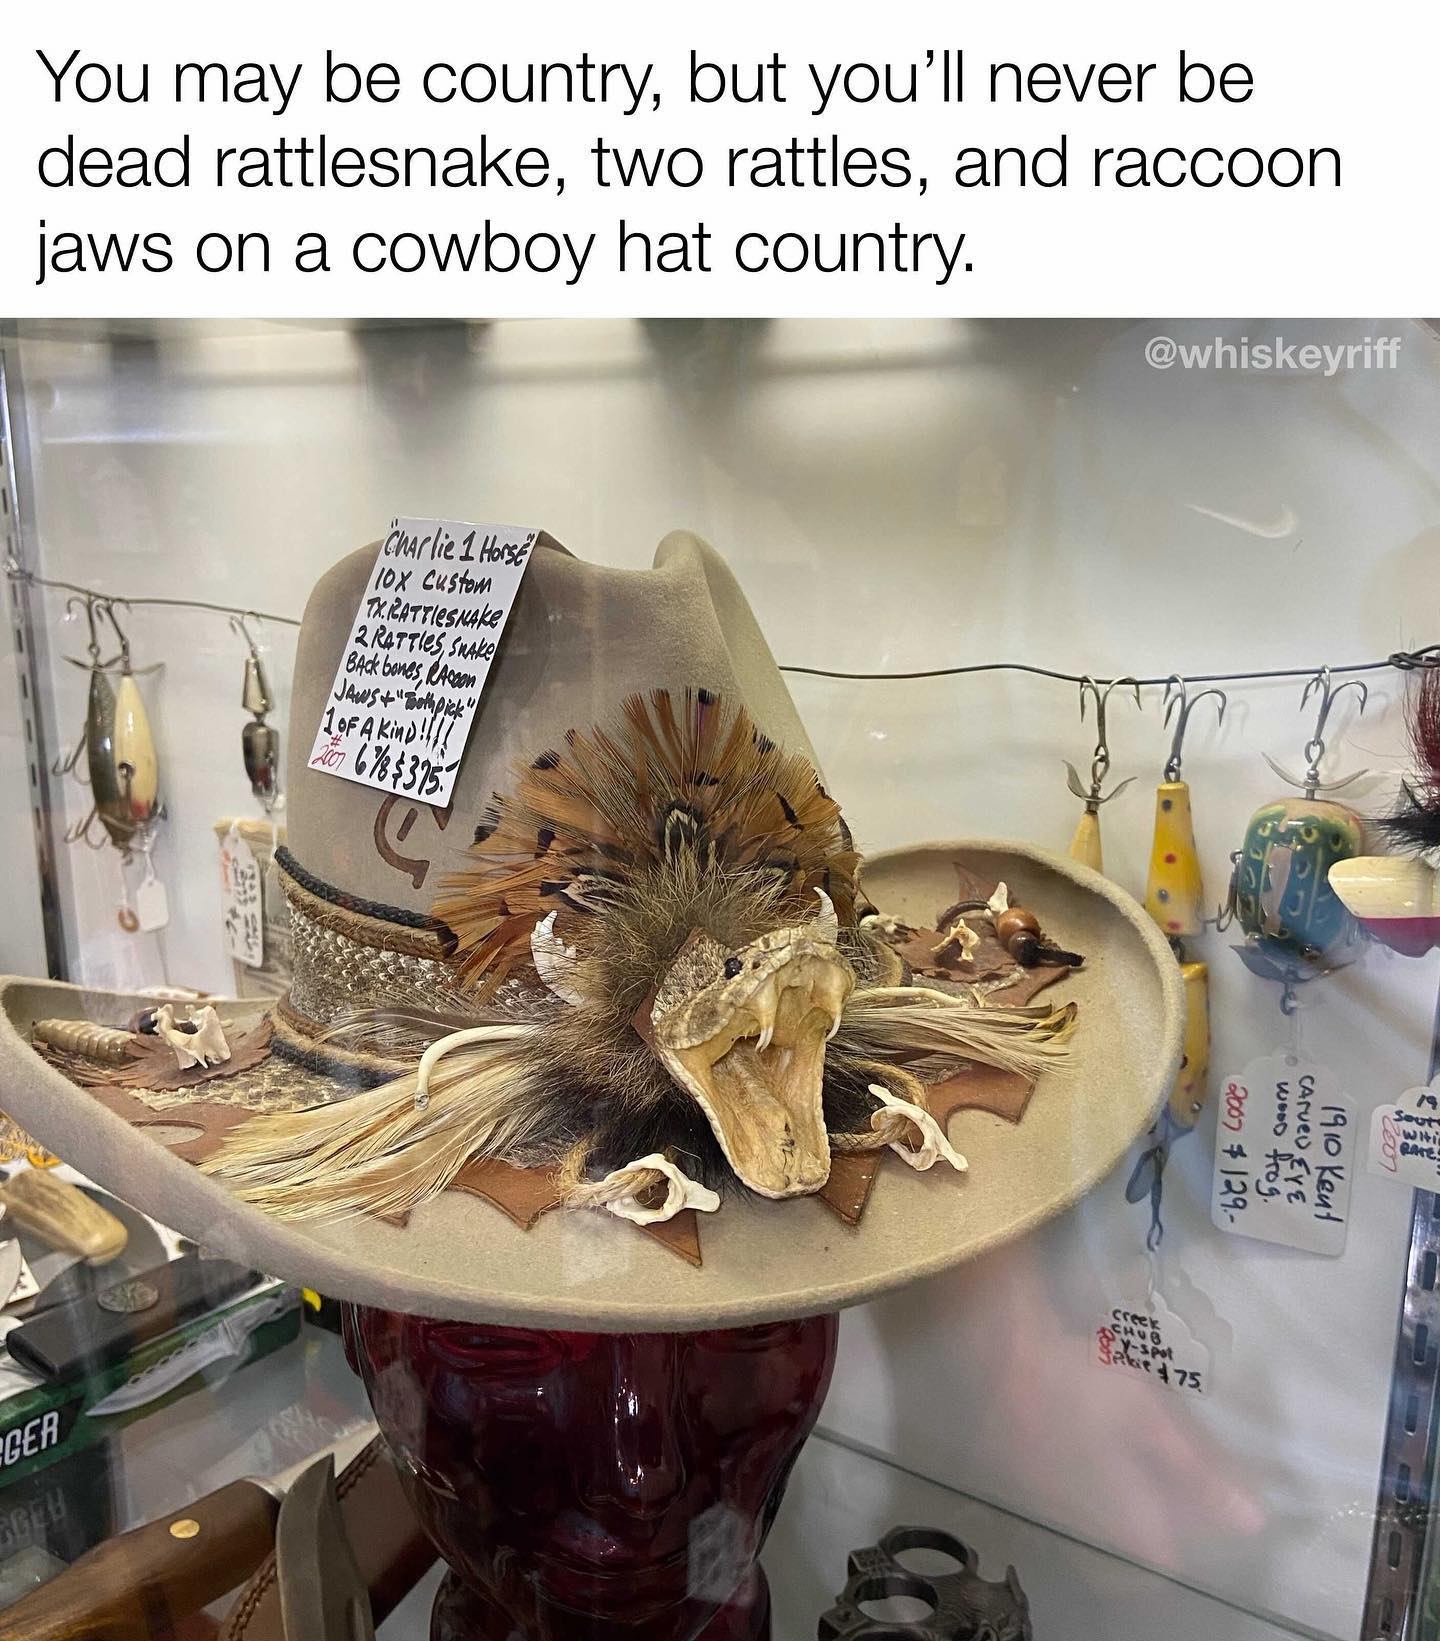 redneck memes and pics - You may be country, but you'll never be dead rattlesnake, two rattles, and raccoon jaws on a cowboy hat country. Esna Ger 667! Charlie 1 Horse 10X Custom Tx.Battlesnake 2 Rattles, Shake Back bones, Raccon Jaws"Toothpick" 1 Of A Ki